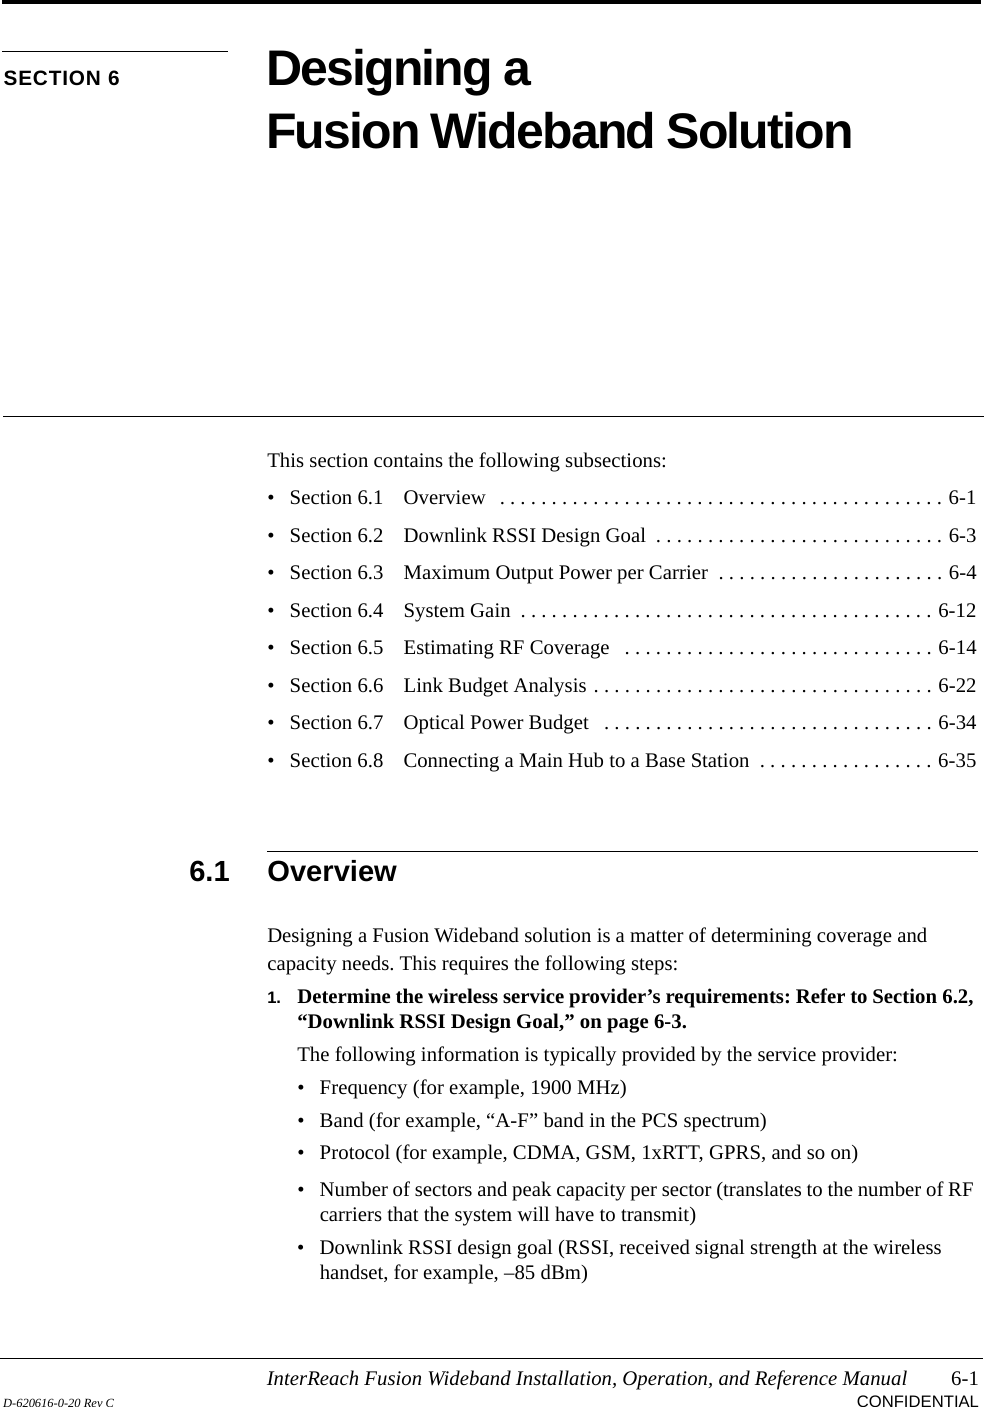 InterReach Fusion Wideband Installation, Operation, and Reference Manual 6-1D-620616-0-20 Rev C CONFIDENTIALSECTION 6 Designing a Fusion Wideband SolutionThis section contains the following subsections:• Section 6.1   Overview   . . . . . . . . . . . . . . . . . . . . . . . . . . . . . . . . . . . . . . . . . . . 6-1• Section 6.2   Downlink RSSI Design Goal  . . . . . . . . . . . . . . . . . . . . . . . . . . . . 6-3• Section 6.3   Maximum Output Power per Carrier  . . . . . . . . . . . . . . . . . . . . . . 6-4• Section 6.4   System Gain  . . . . . . . . . . . . . . . . . . . . . . . . . . . . . . . . . . . . . . . . 6-12• Section 6.5   Estimating RF Coverage   . . . . . . . . . . . . . . . . . . . . . . . . . . . . . . 6-14• Section 6.6   Link Budget Analysis . . . . . . . . . . . . . . . . . . . . . . . . . . . . . . . . . 6-22• Section 6.7   Optical Power Budget   . . . . . . . . . . . . . . . . . . . . . . . . . . . . . . . . 6-34• Section 6.8   Connecting a Main Hub to a Base Station  . . . . . . . . . . . . . . . . . 6-356.1 OverviewDesigning a Fusion Wideband solution is a matter of determining coverage and capacity needs. This requires the following steps:1. Determine the wireless service provider’s requirements: Refer to Section 6.2, “Downlink RSSI Design Goal,” on page 6-3.The following information is typically provided by the service provider:• Frequency (for example, 1900 MHz)• Band (for example, “A-F” band in the PCS spectrum)• Protocol (for example, CDMA, GSM, 1xRTT, GPRS, and so on)• Number of sectors and peak capacity per sector (translates to the number of RF carriers that the system will have to transmit)• Downlink RSSI design goal (RSSI, received signal strength at the wireless handset, for example, –85 dBm)